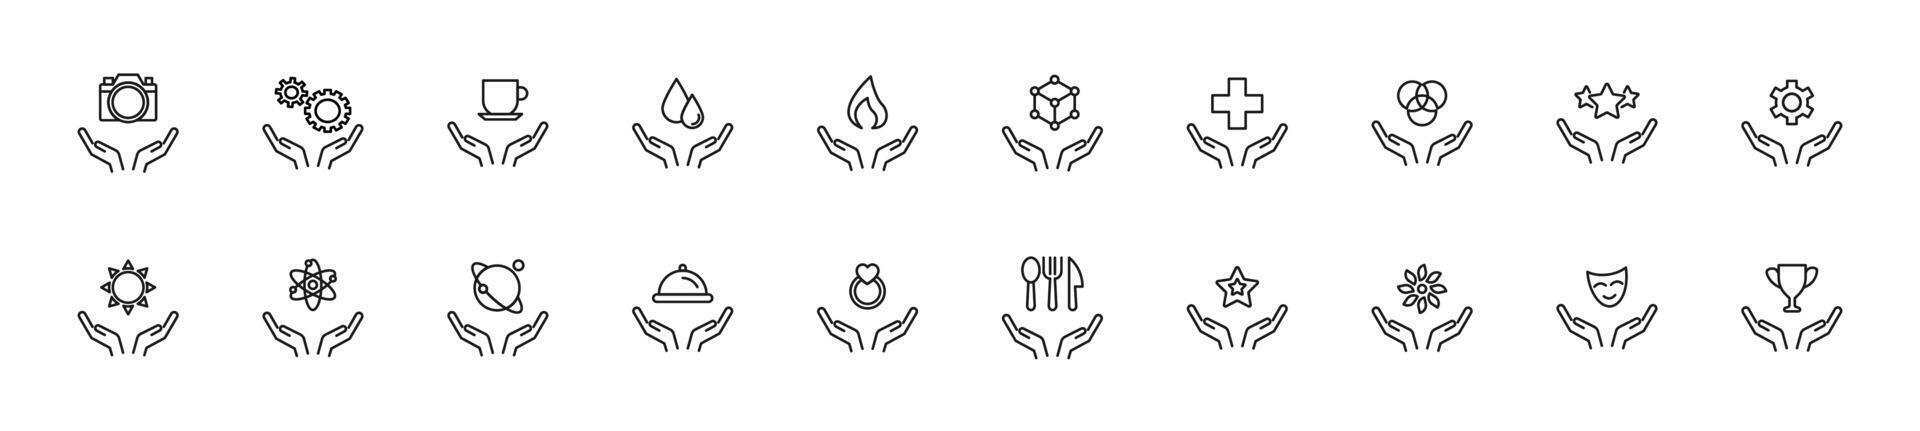 Collection of thin line icons of various items over opened palms. Linear sign and editable stroke. Suitable for web sites, books, articles vector